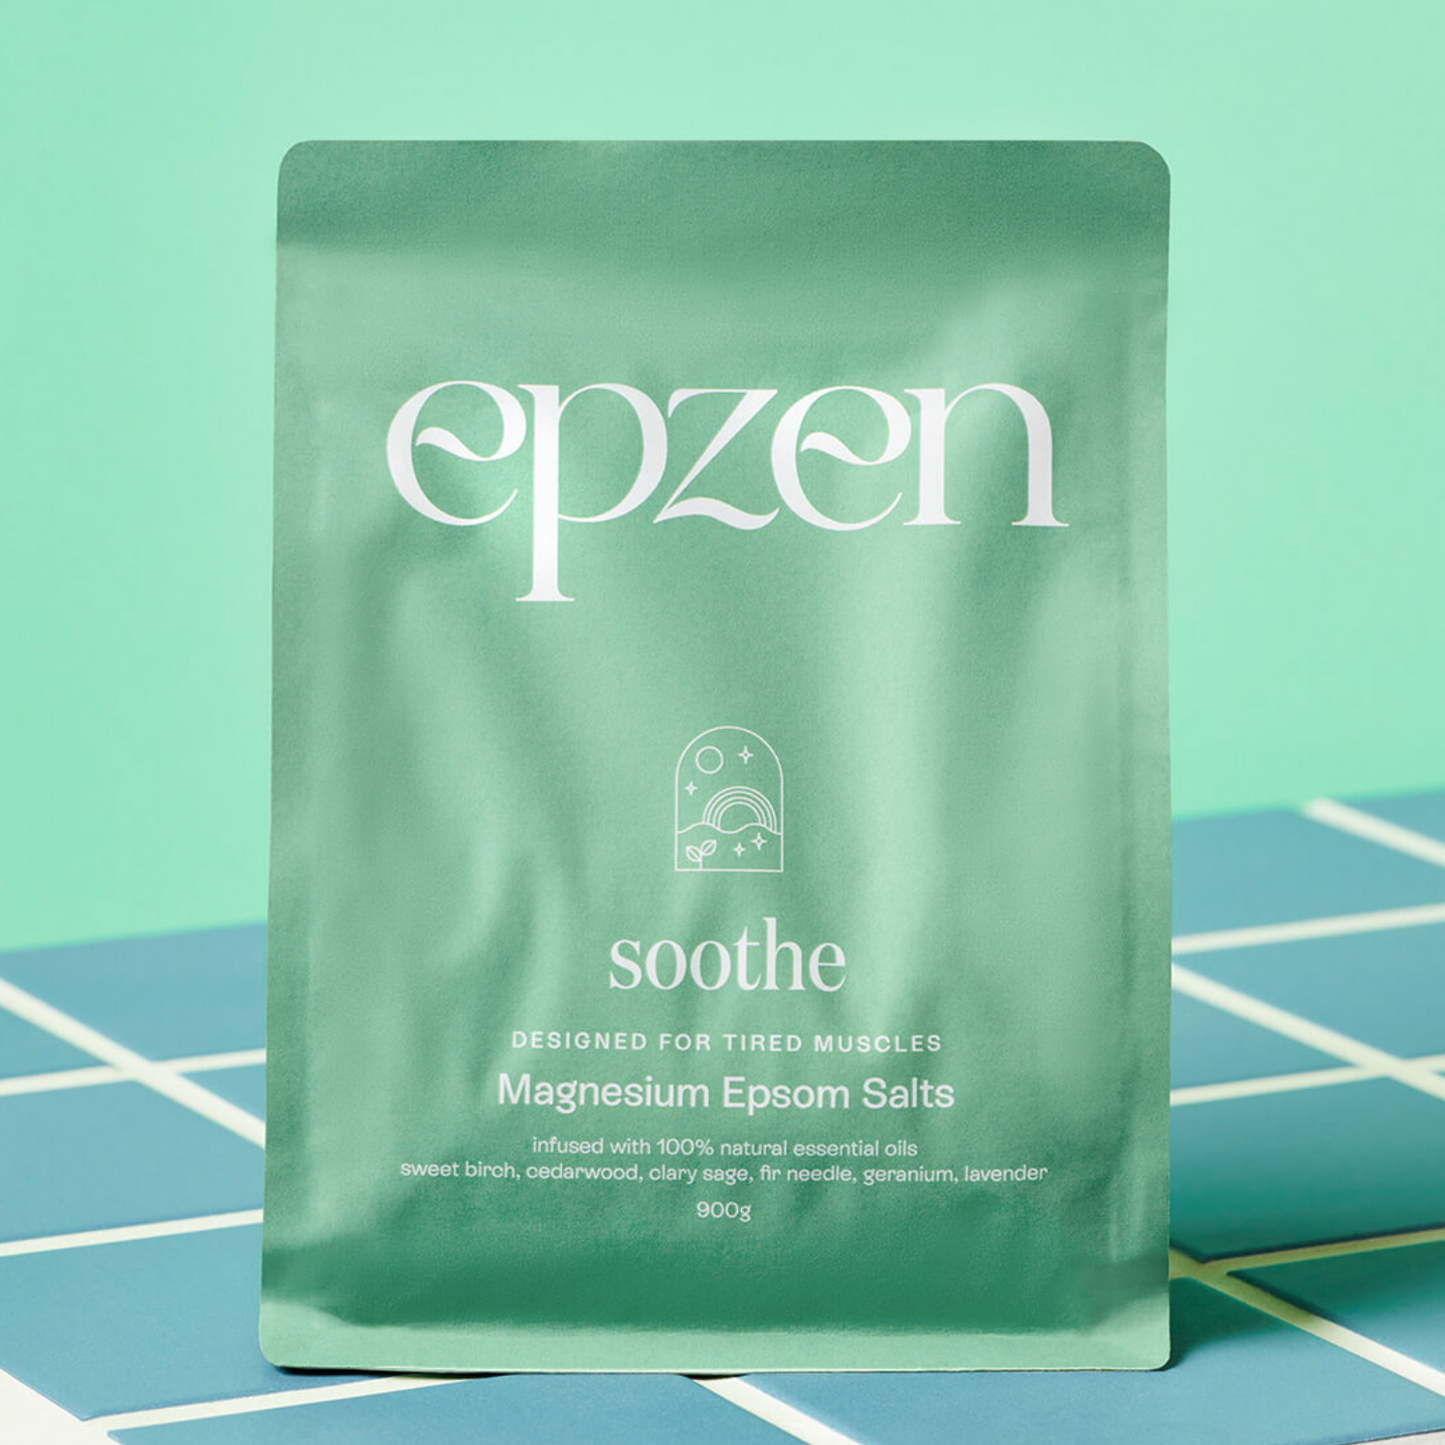 EpZen Magnesium Epsom Salts 900g, Soothe {Tired Muscles}